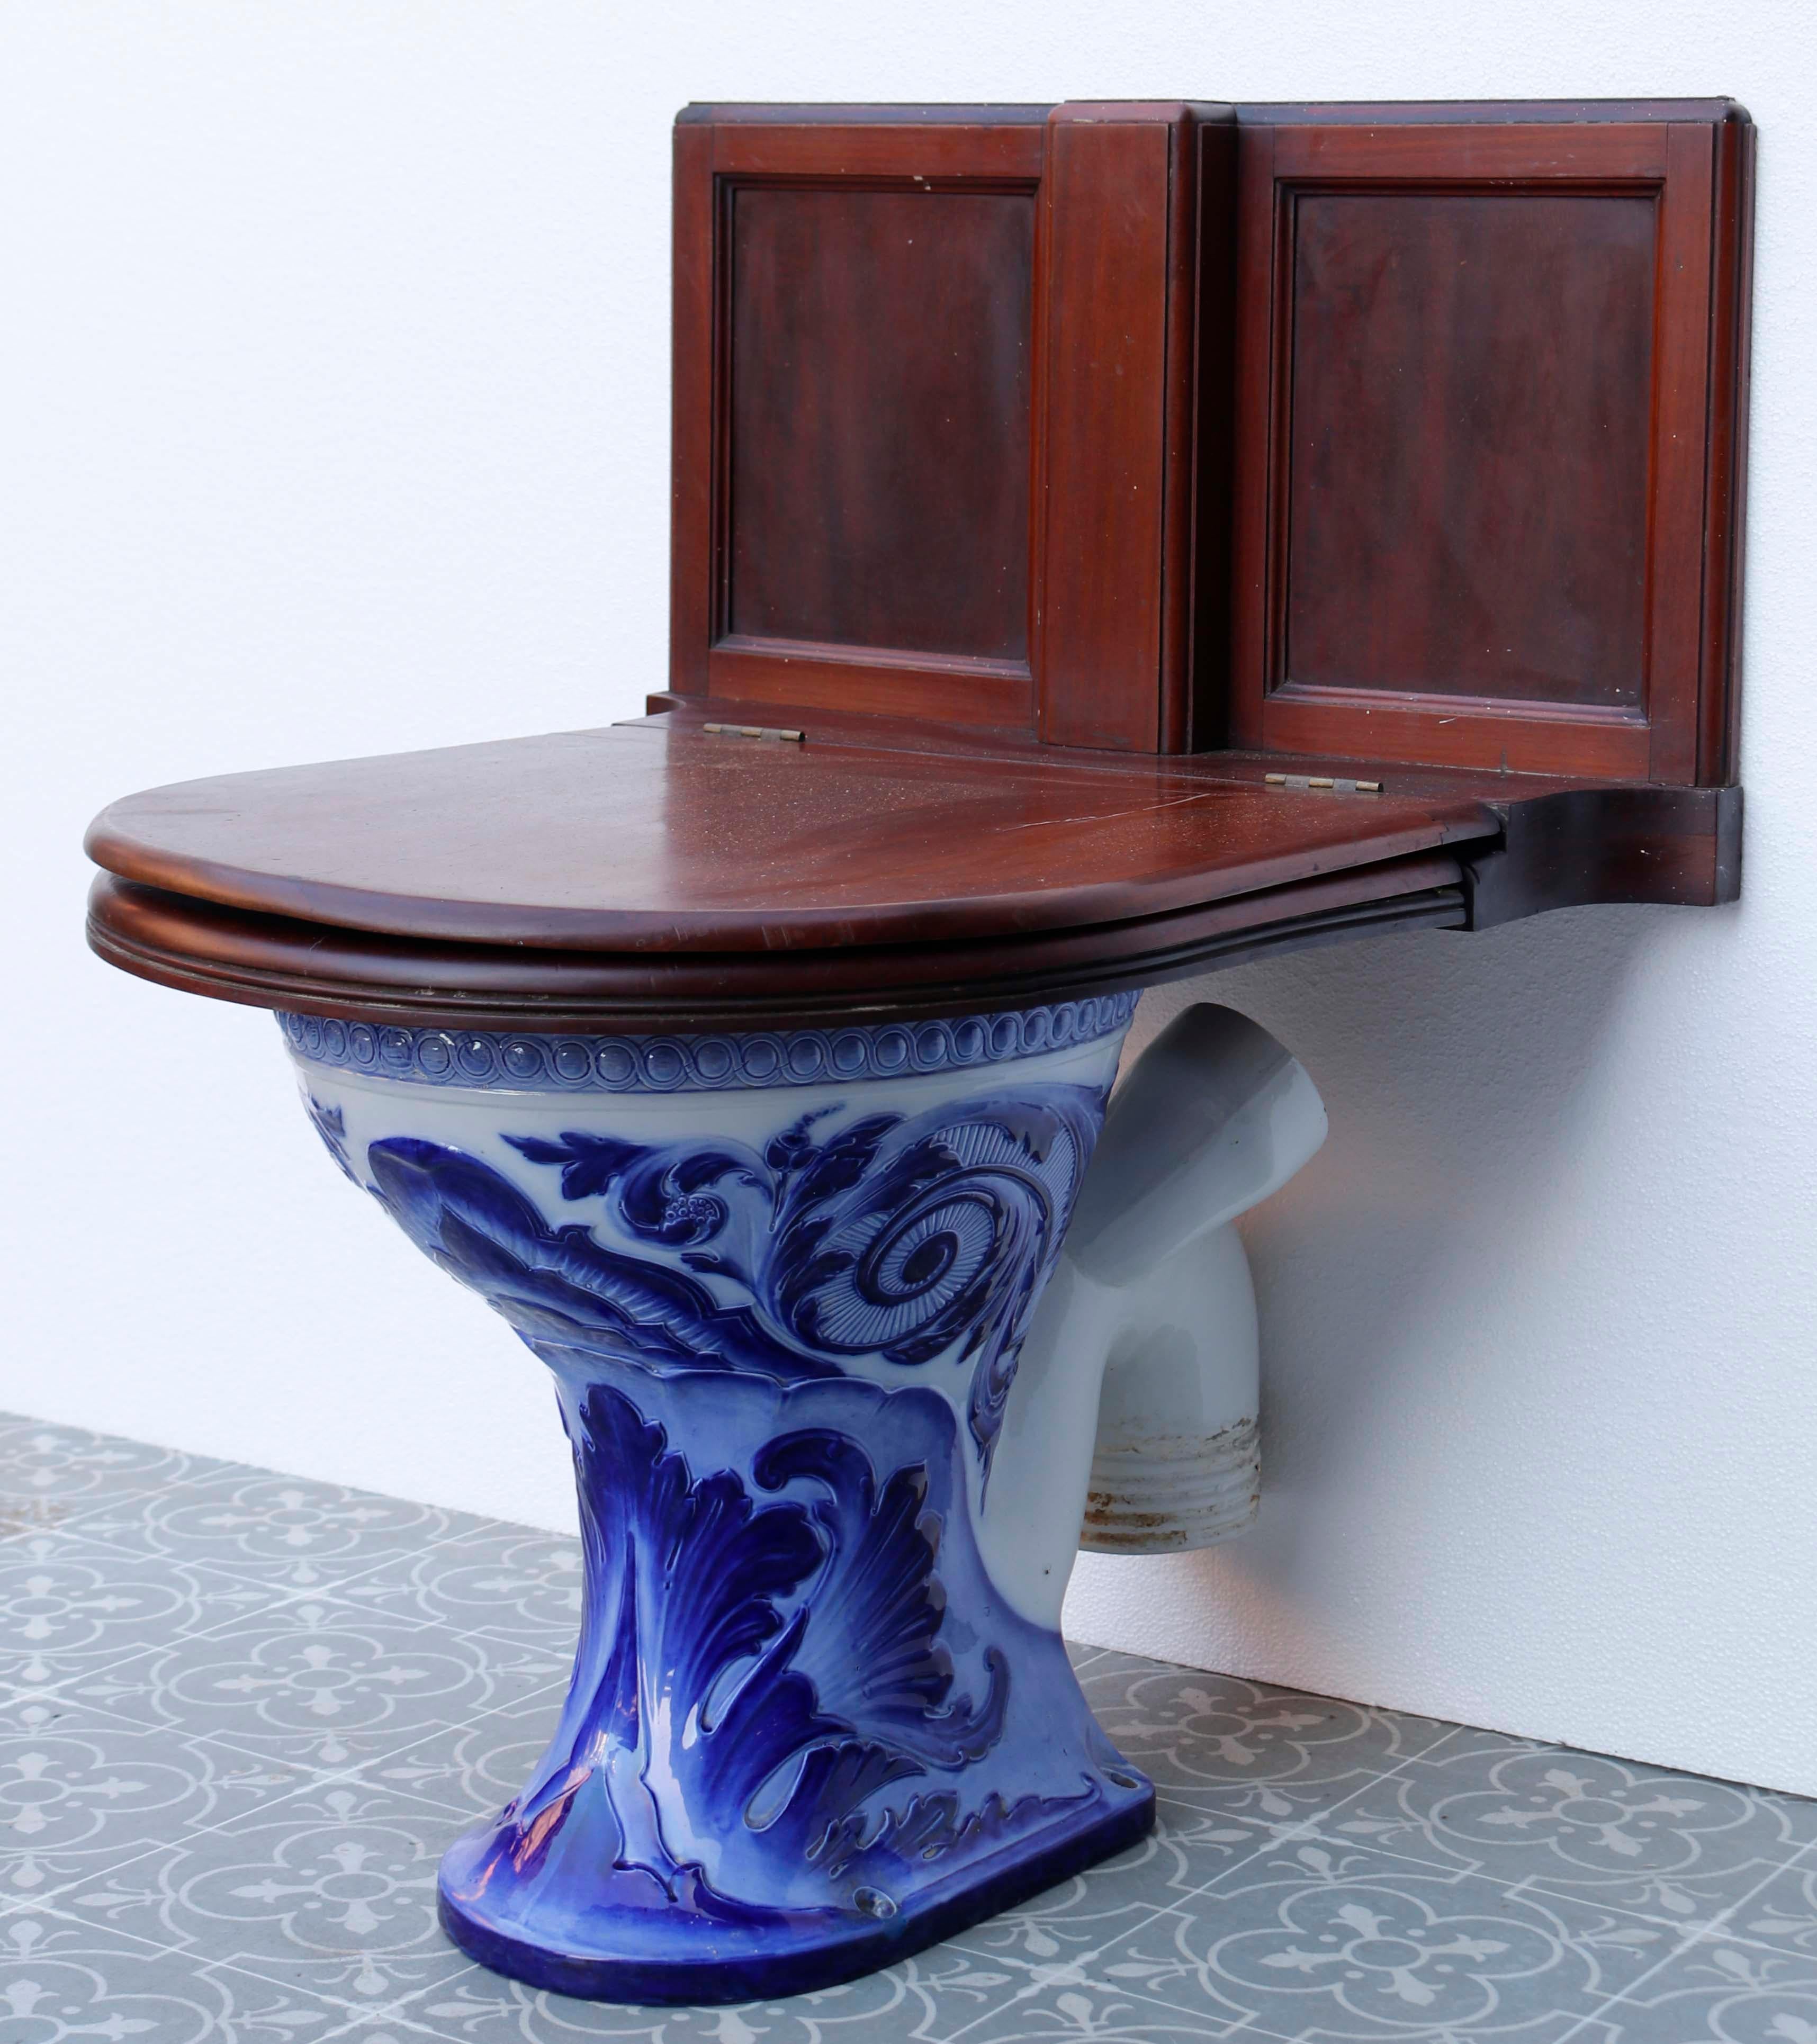 Antique Doulton and Co Glazed toilet. A porcelain blue glazed toilet with prominent original figures. The Mahogany seat compliments the striking blue and white porcelain toilet underneath bringing the vibrant blue to life. Doulton and Co were